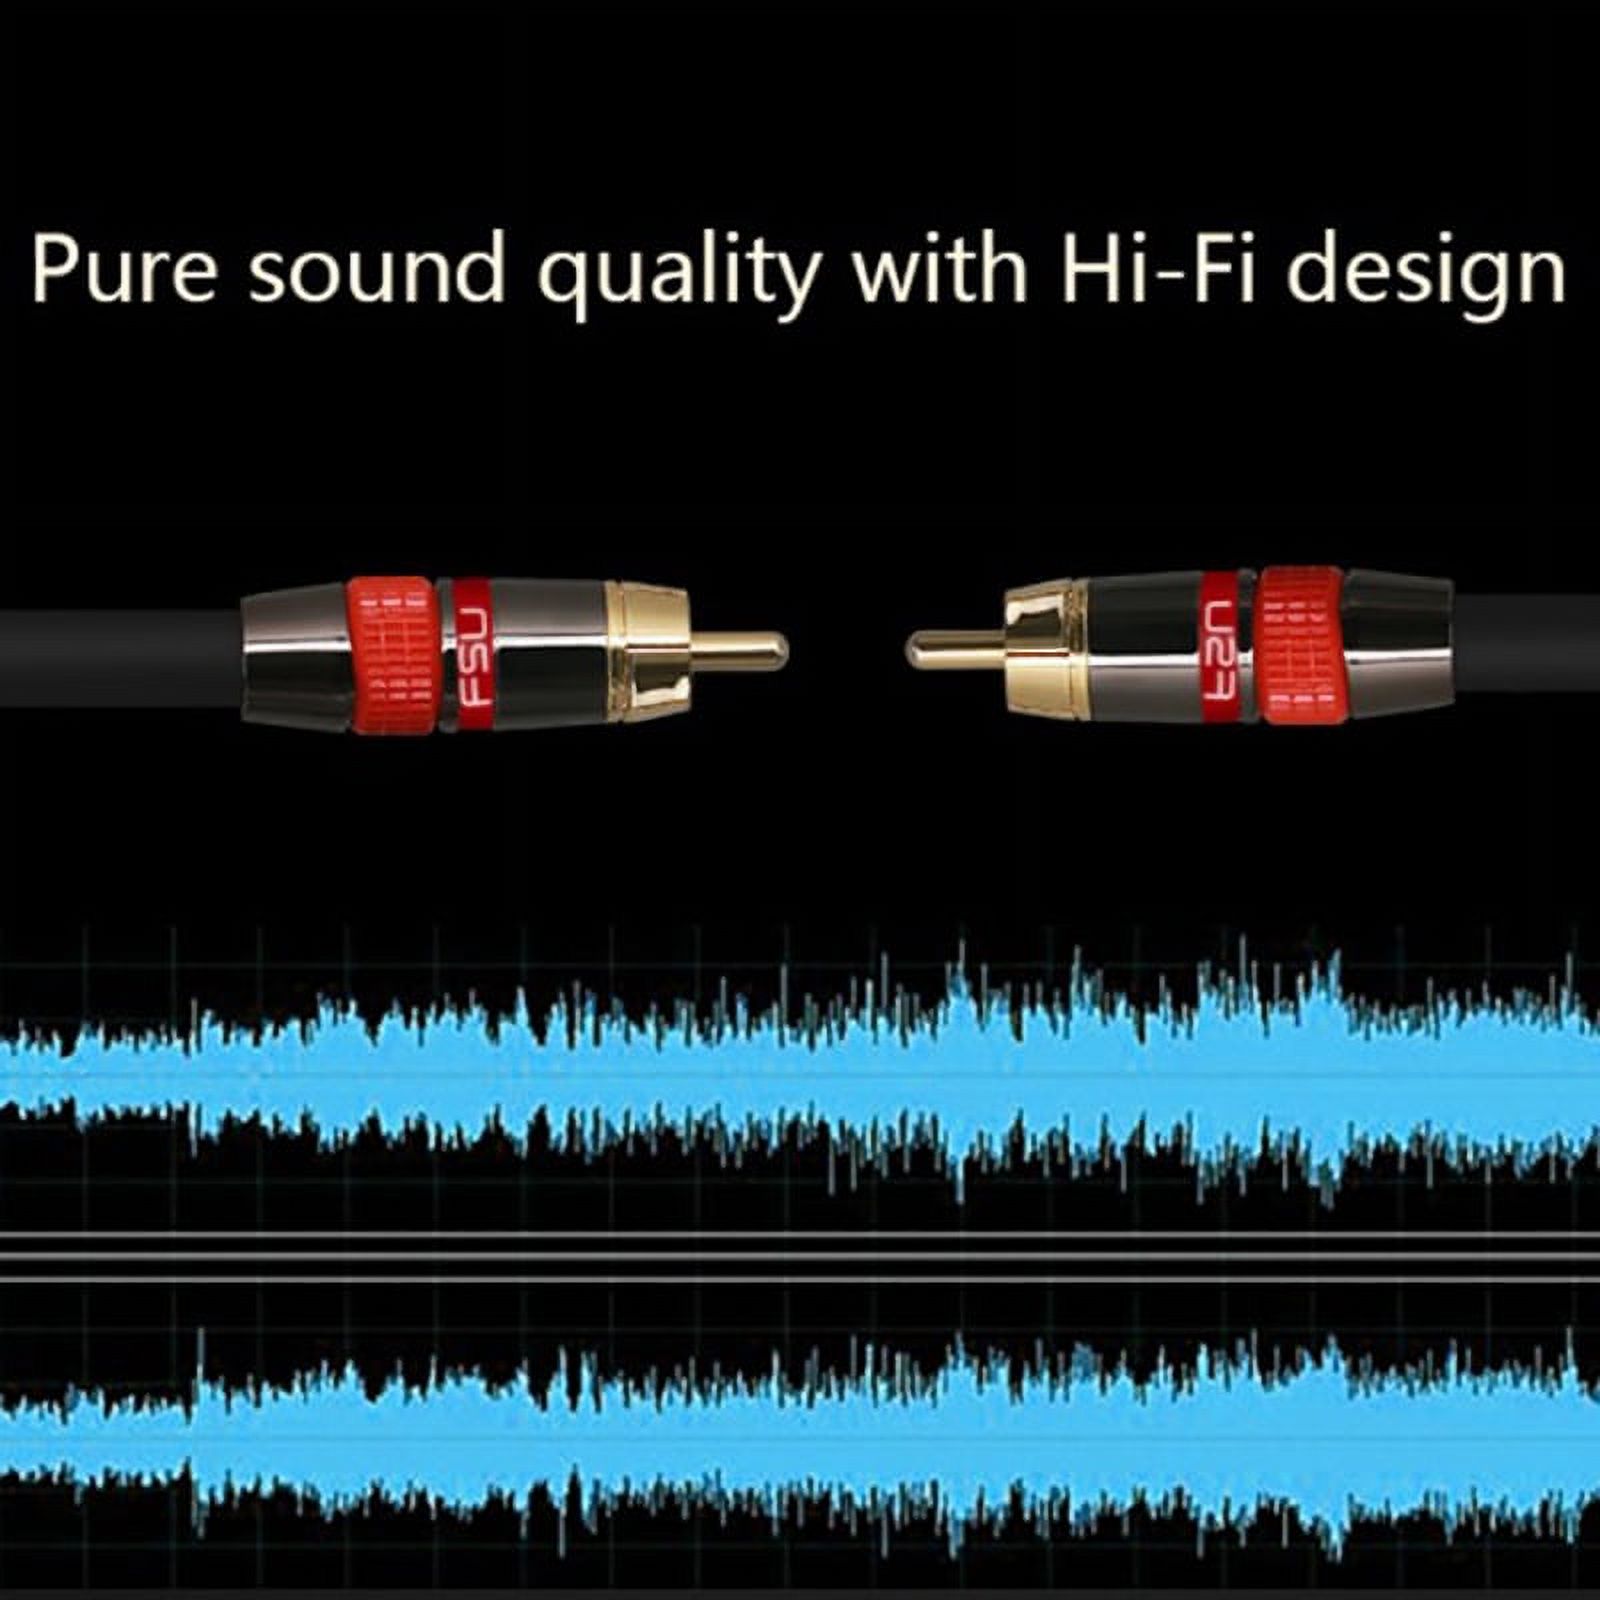 Digital Audio RCA Cable Premium Stereo RCA to RCA Coaxial SPDIF Cable Male Speaker Hifi Subwoofer Cable AV 2M - image 3 of 8